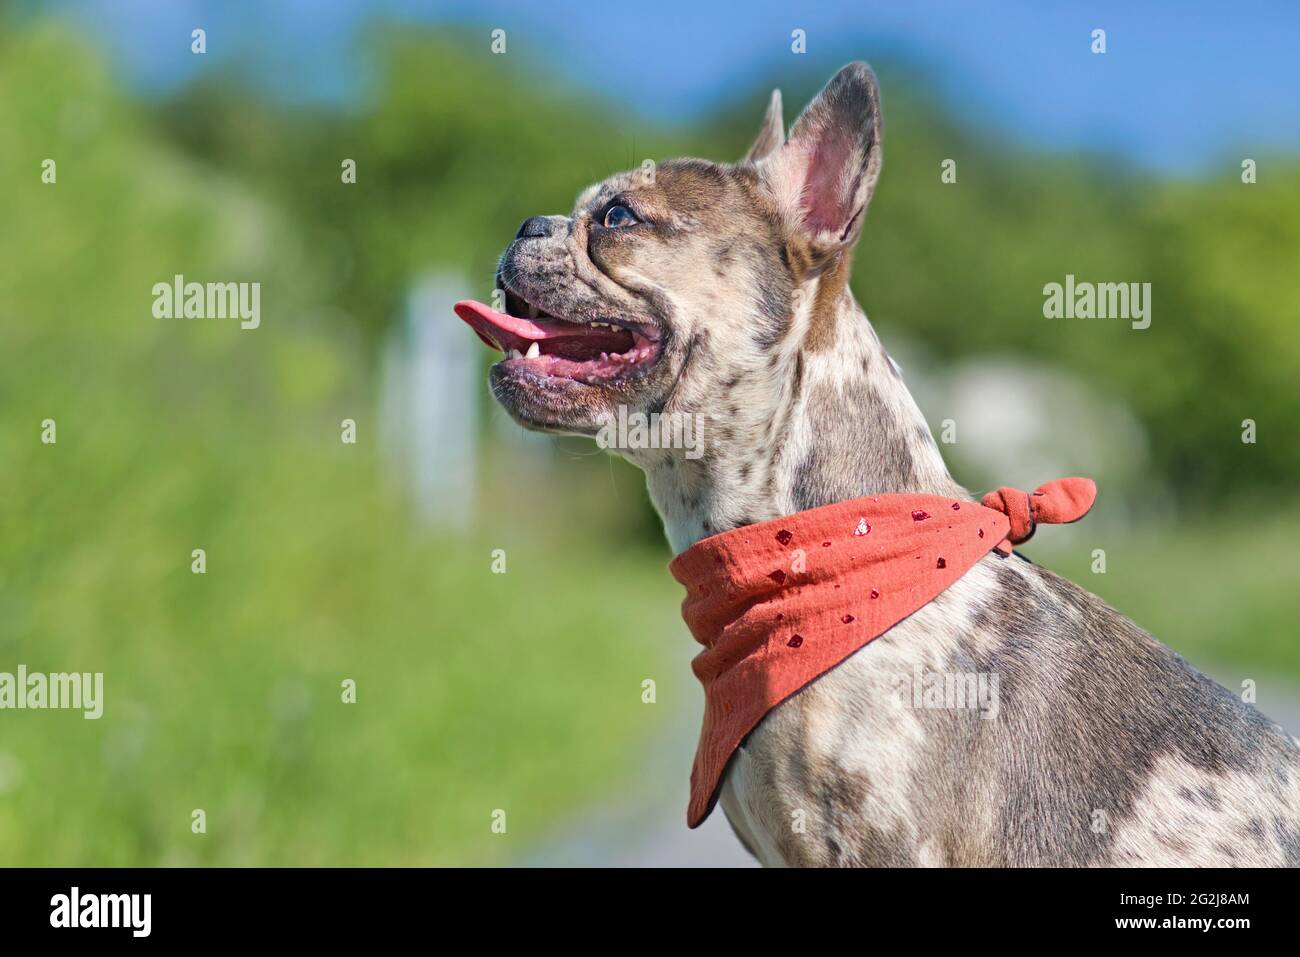 Side view of merle colored French Bulldog dog wearing red neckerchief  with tongue sticking out Stock Photo